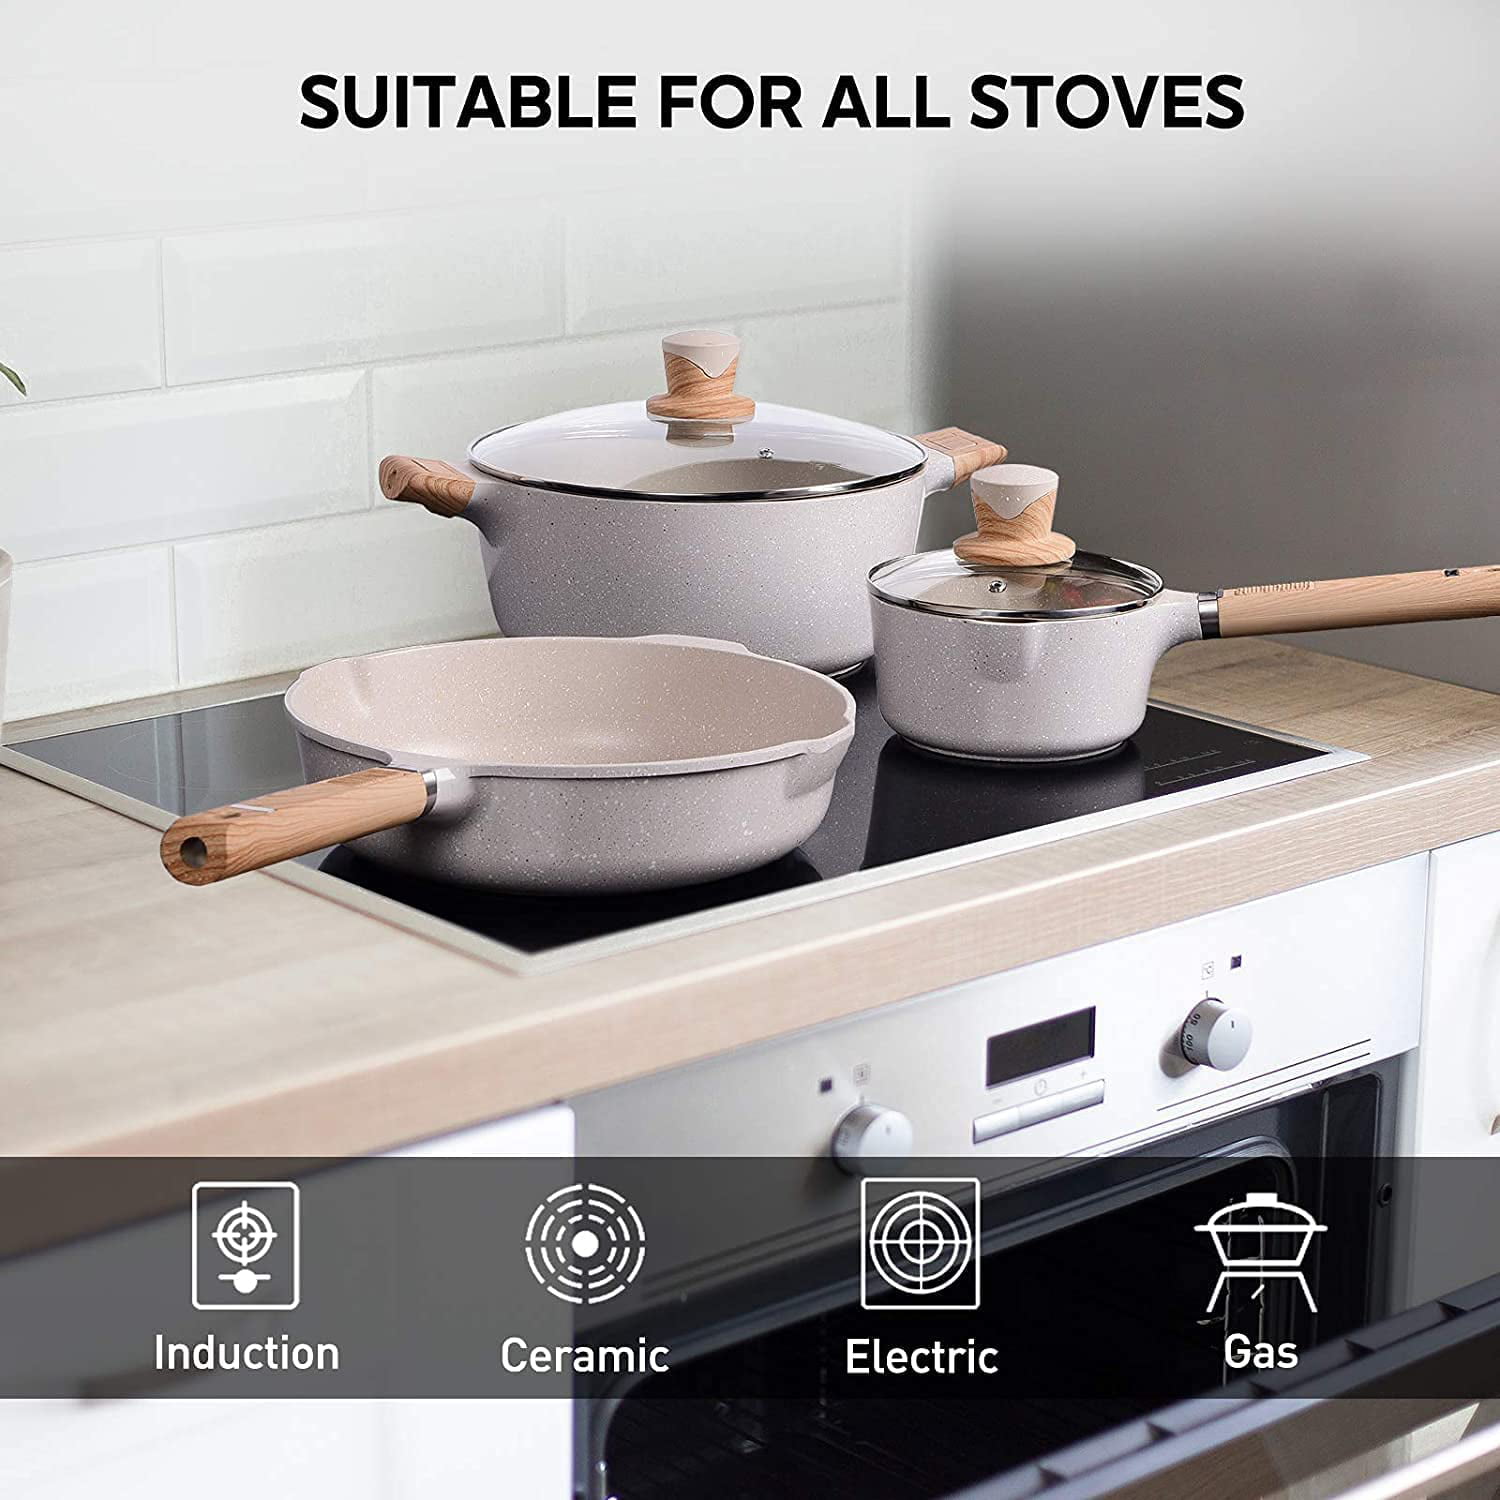 Pots and Pans Set, iMounTEK Nonstick Induction Kitchen Cookware Sets, White  Granite Coating Dishwasher Safe, Frying Pans, Saucepans, Stockpot with